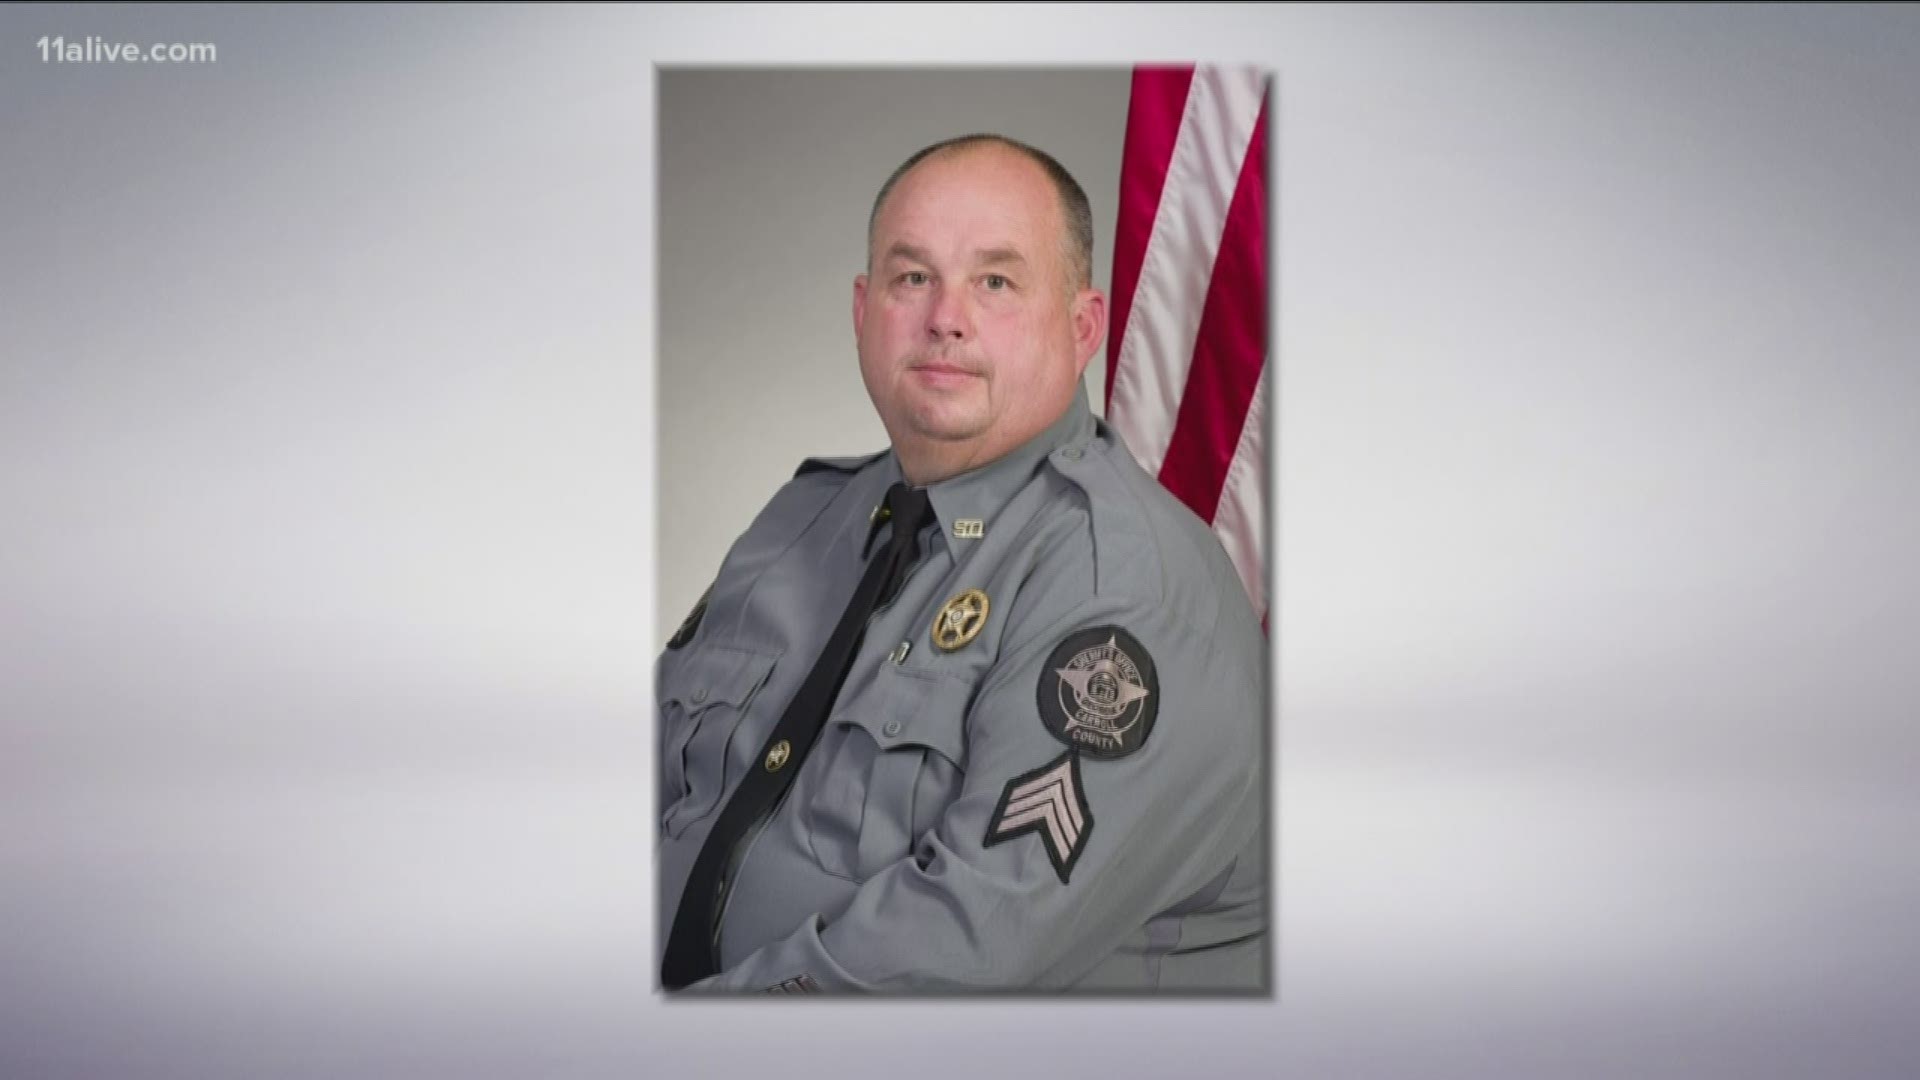 Sgt. Lee Maxwell "truly had a servant’s heart" and "proudly" served the Carroll County Sheriff’s Office since 1994, the office said in a Facebook post.